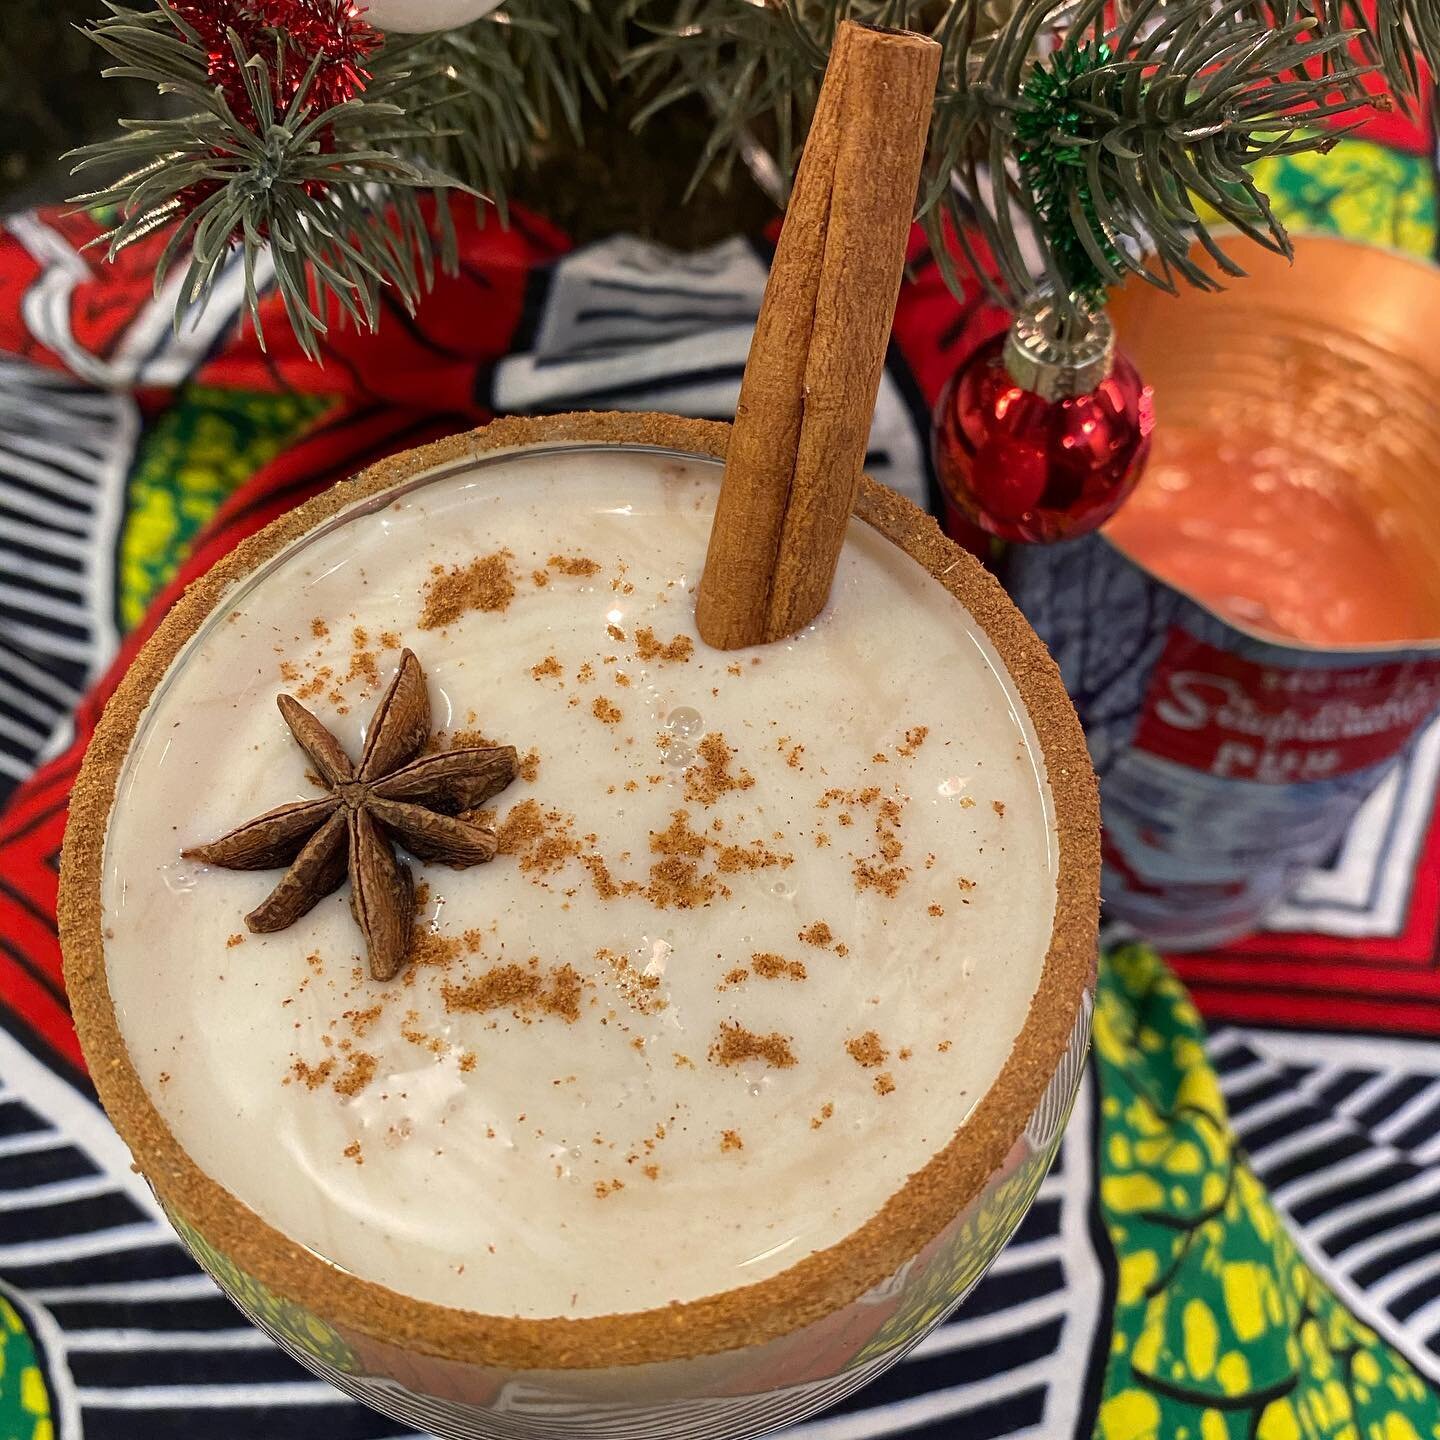 TASTE TUTOR BROWN SPICE NOG Wintertime cocktail featuring NEW Taste Tutor Brown Spice.  Brown Drinks for Girls ⬅️Swipe for recipe or check out the link in Bio...
.
MUSIC PAIRING: All I Want for Christmas is You x Mariah Carey Merry Christmas
.
.
.
.
